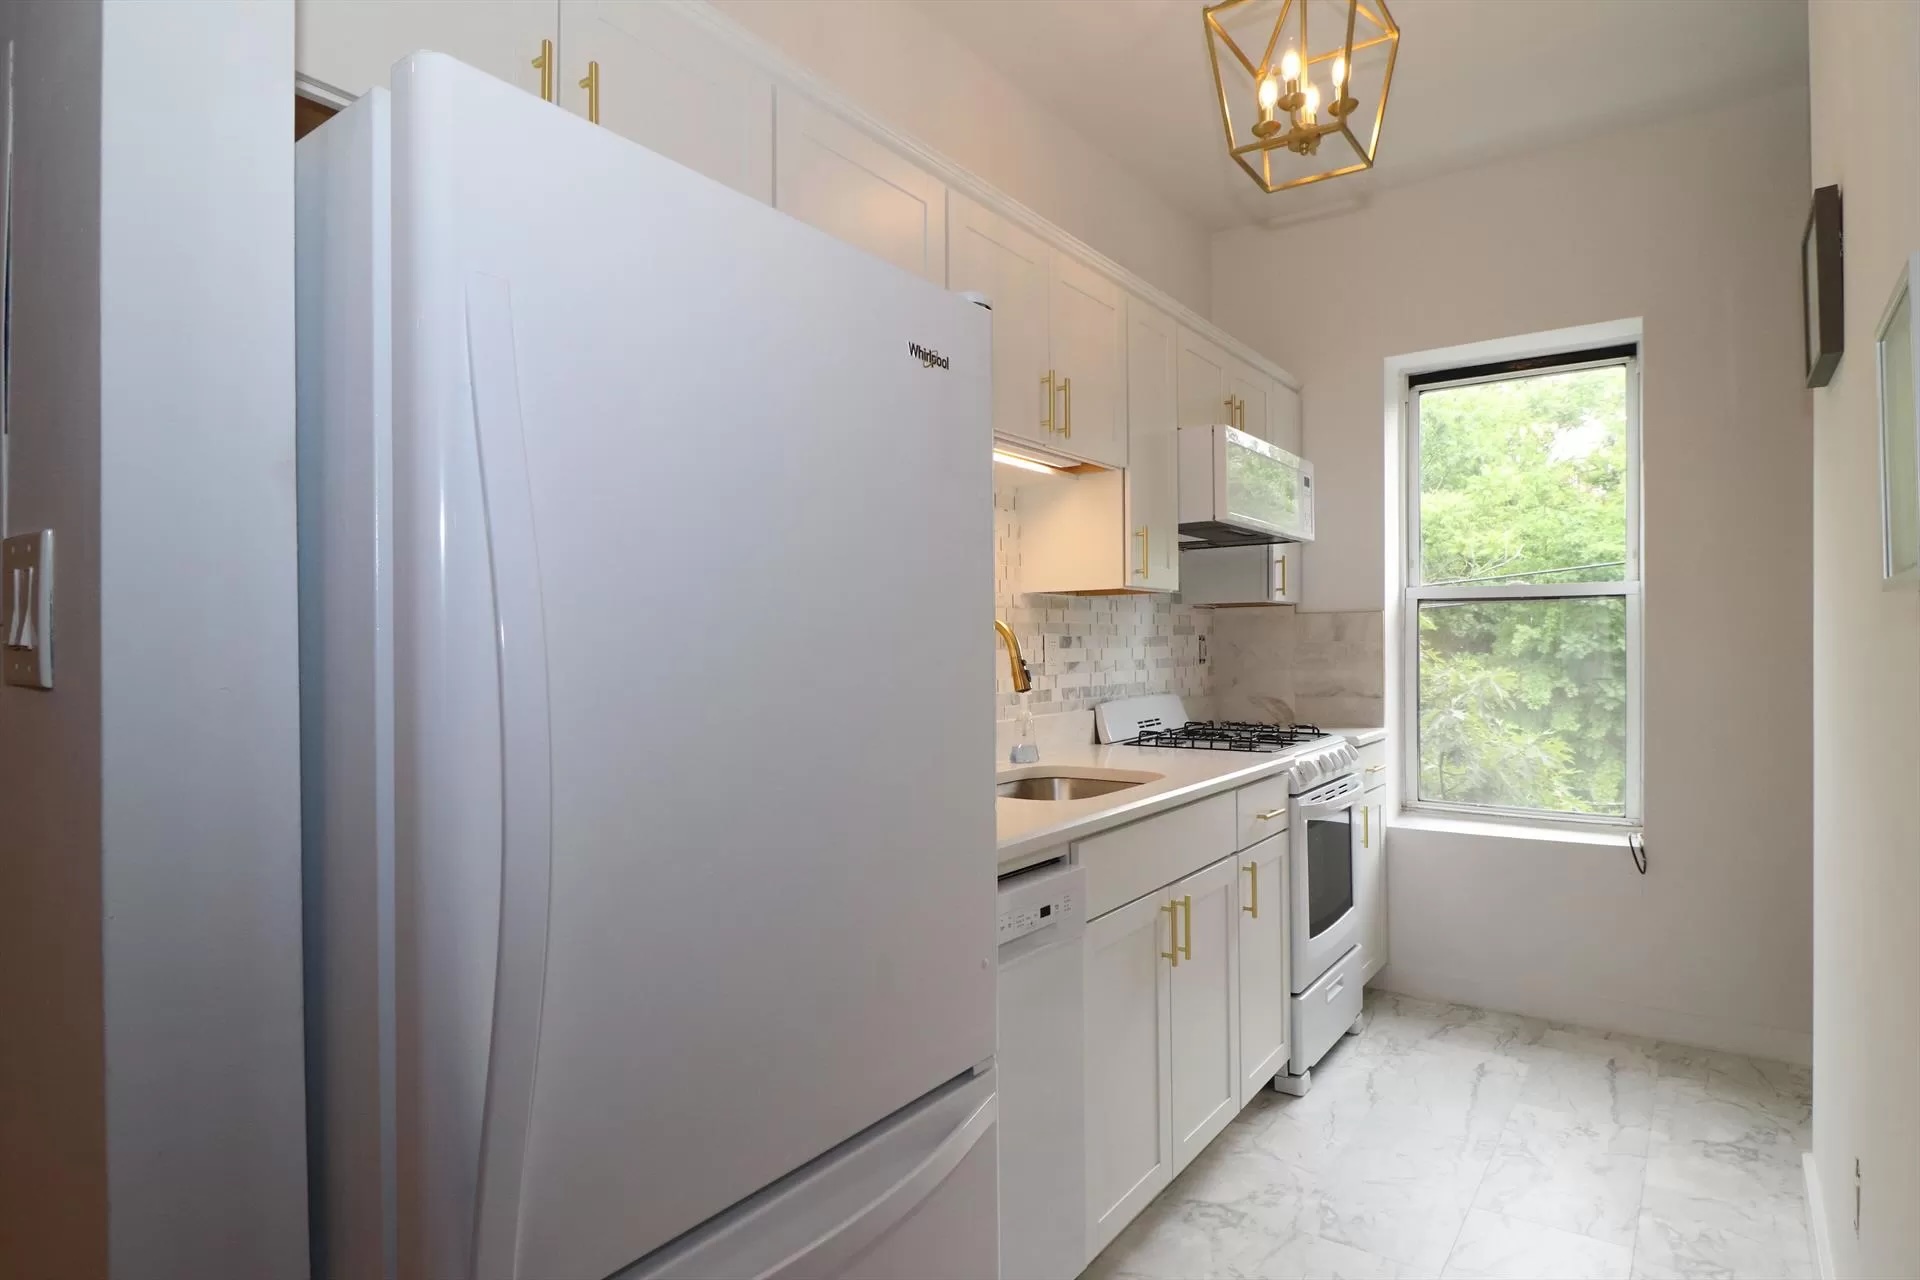 Bright 2 bed / 1 bath apartment with in-unit washer/dryer, central air conditioning, MW and DW. Exposed brick details in main living area.  Just a short distance to PATH Stations and Hamilton Park. Available July 1st.  
Ask for the virtual tour!